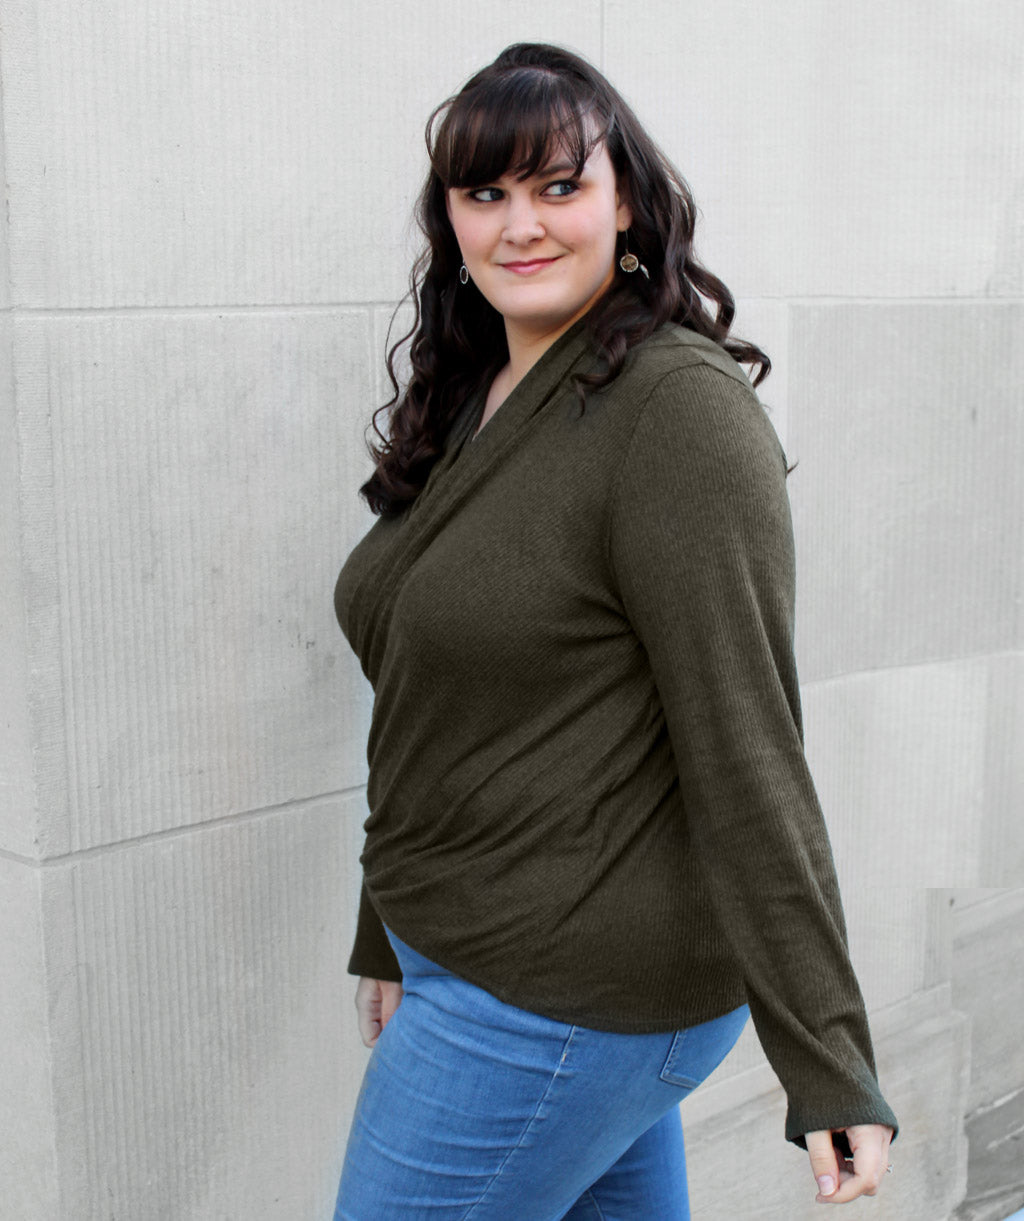 LOIDA brushed draped top in Dark Olive